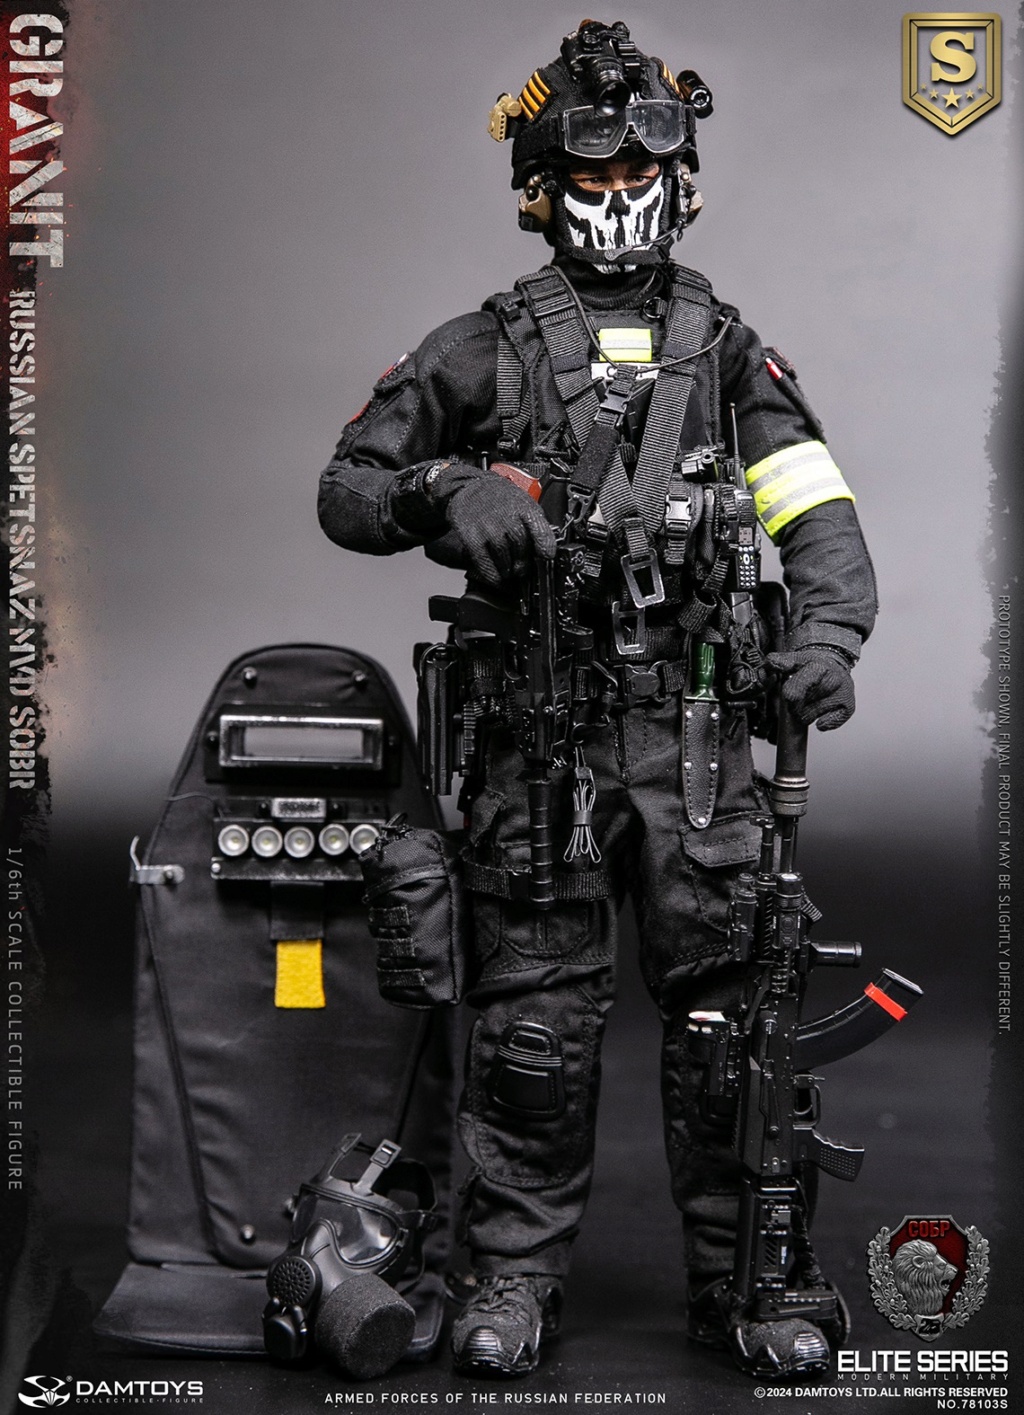 MinisteryOfInternalAffairs - NEW PRODUCT: DAMTOYS: 1/6 Russian Federation Ministry of Internal Affairs MVD-Granite Special Response Team 78103S Special Edition/Elite Edition 11393010